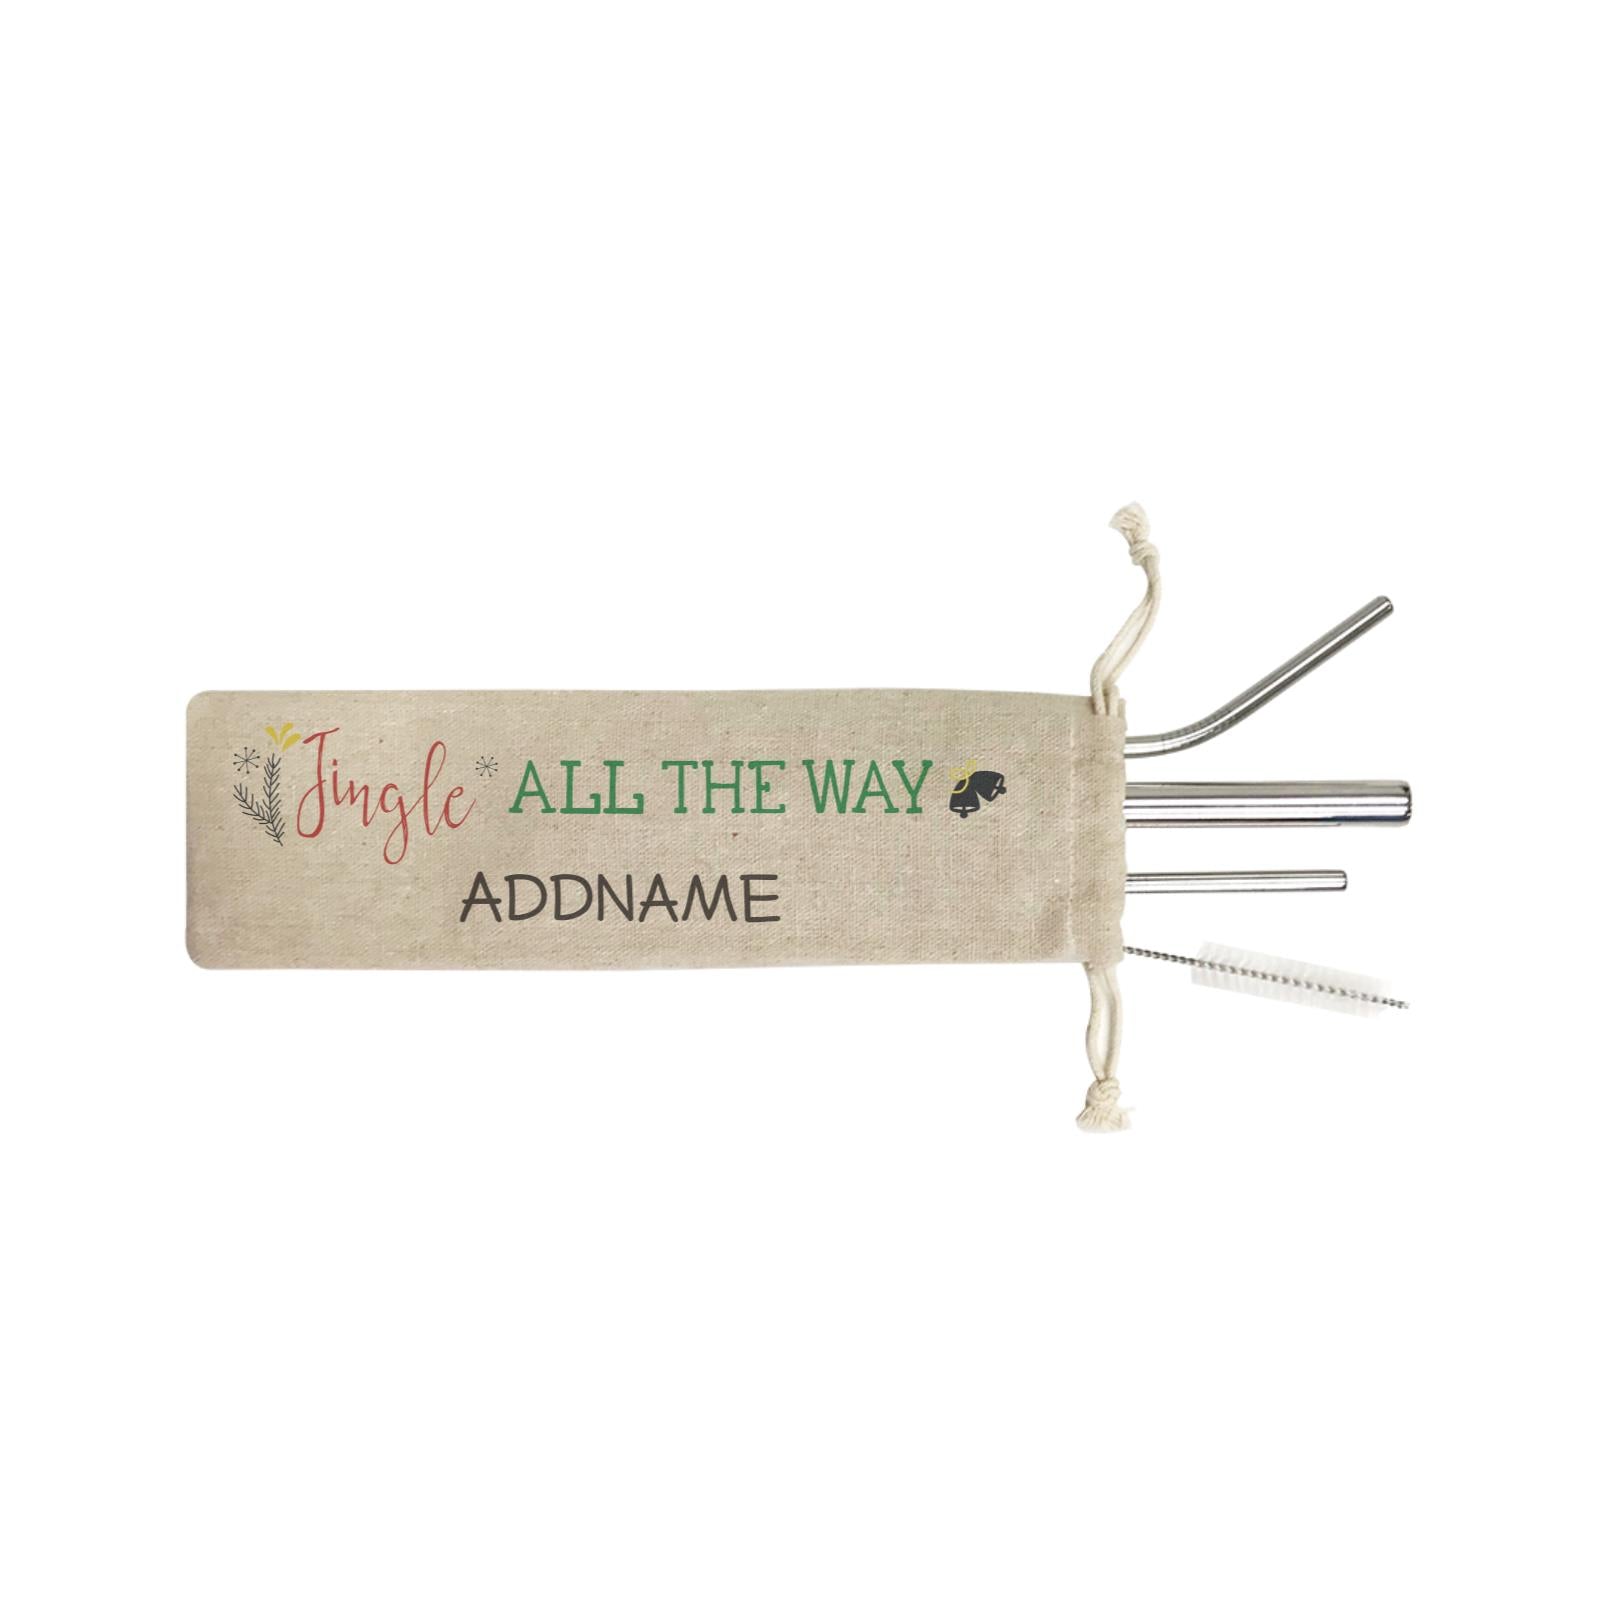 Xmas Jingle All The Way SB 4-in-1 Stainless Steel Straw Set In a Satchel